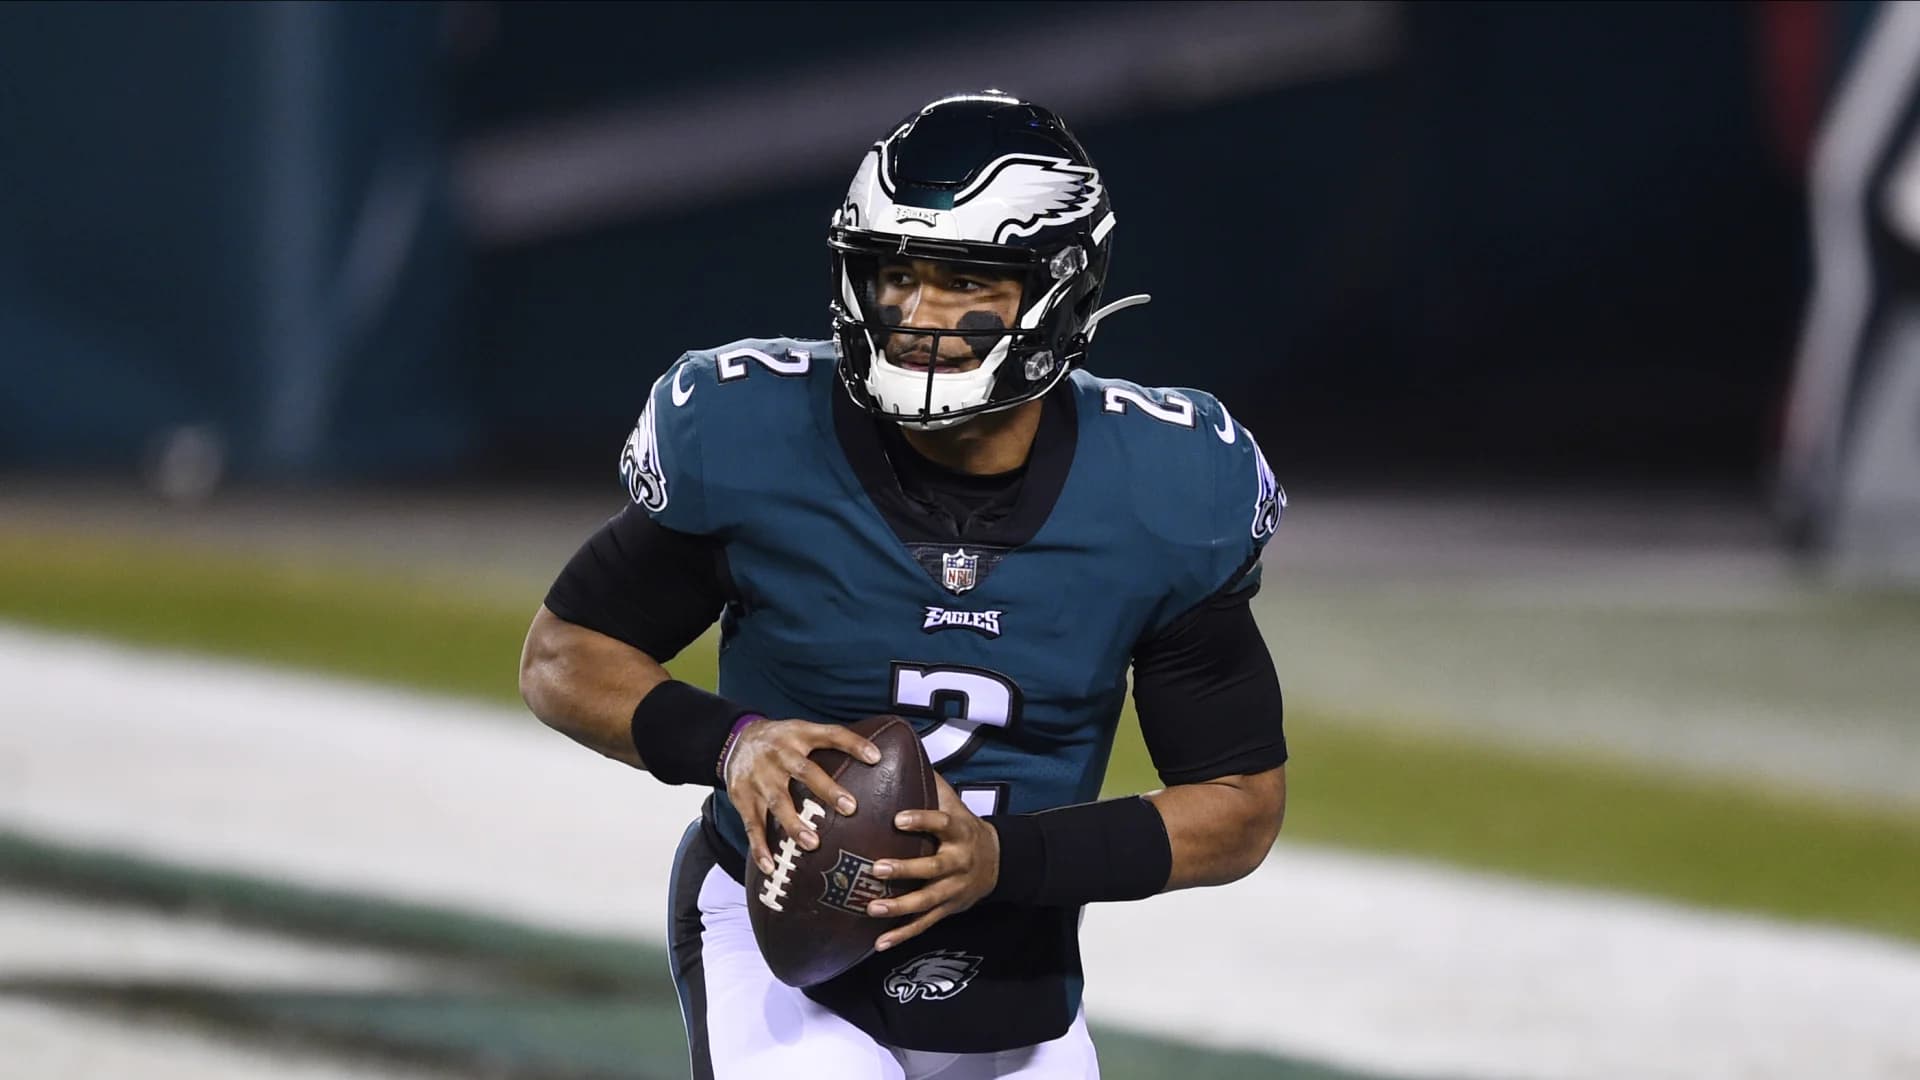 AP sources: Eagles won't be penalized for QB decisions in game vs. Washington